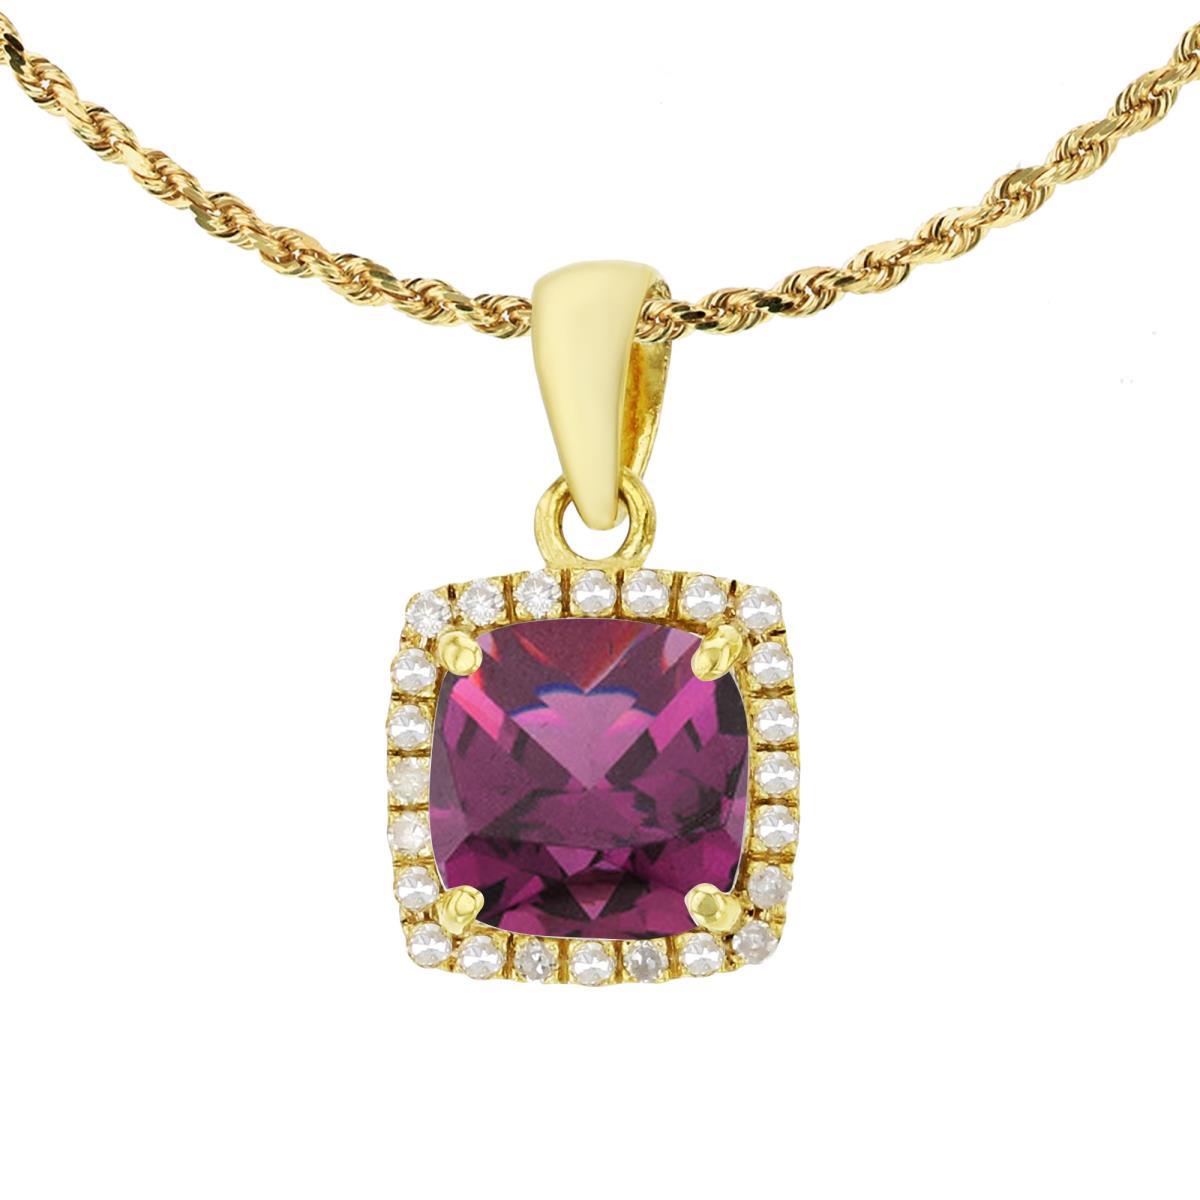 10K Yellow Gold 7mm Cushion Rhodolite & 0.12 CTTW Diamond Halo 18" Rope Chain Necklace